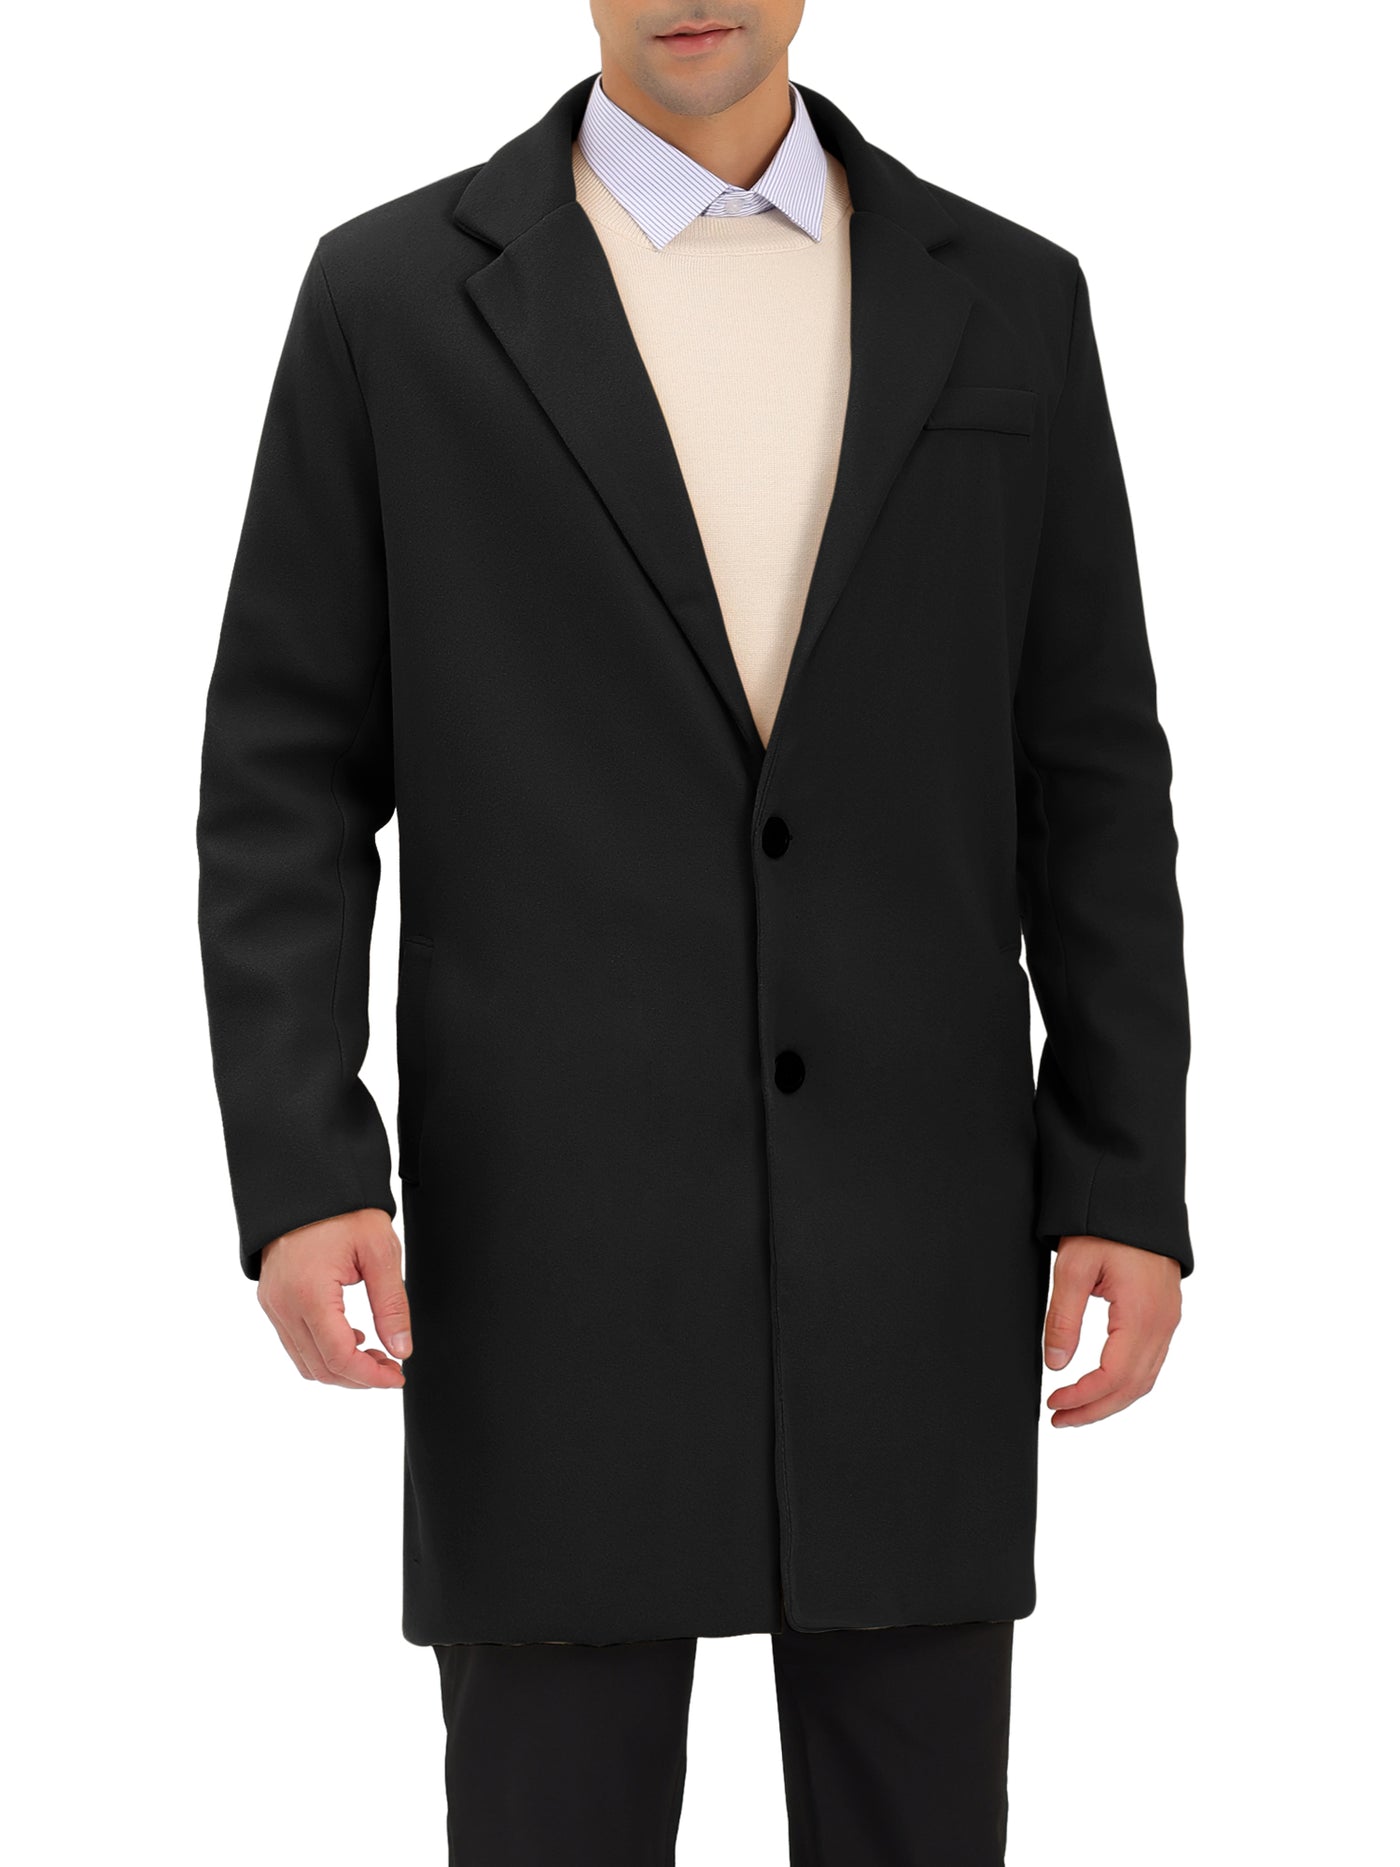 Bublédon Men's Trench Coat Single Breasted Lapel Collar Mid-Length Solid Overcoat